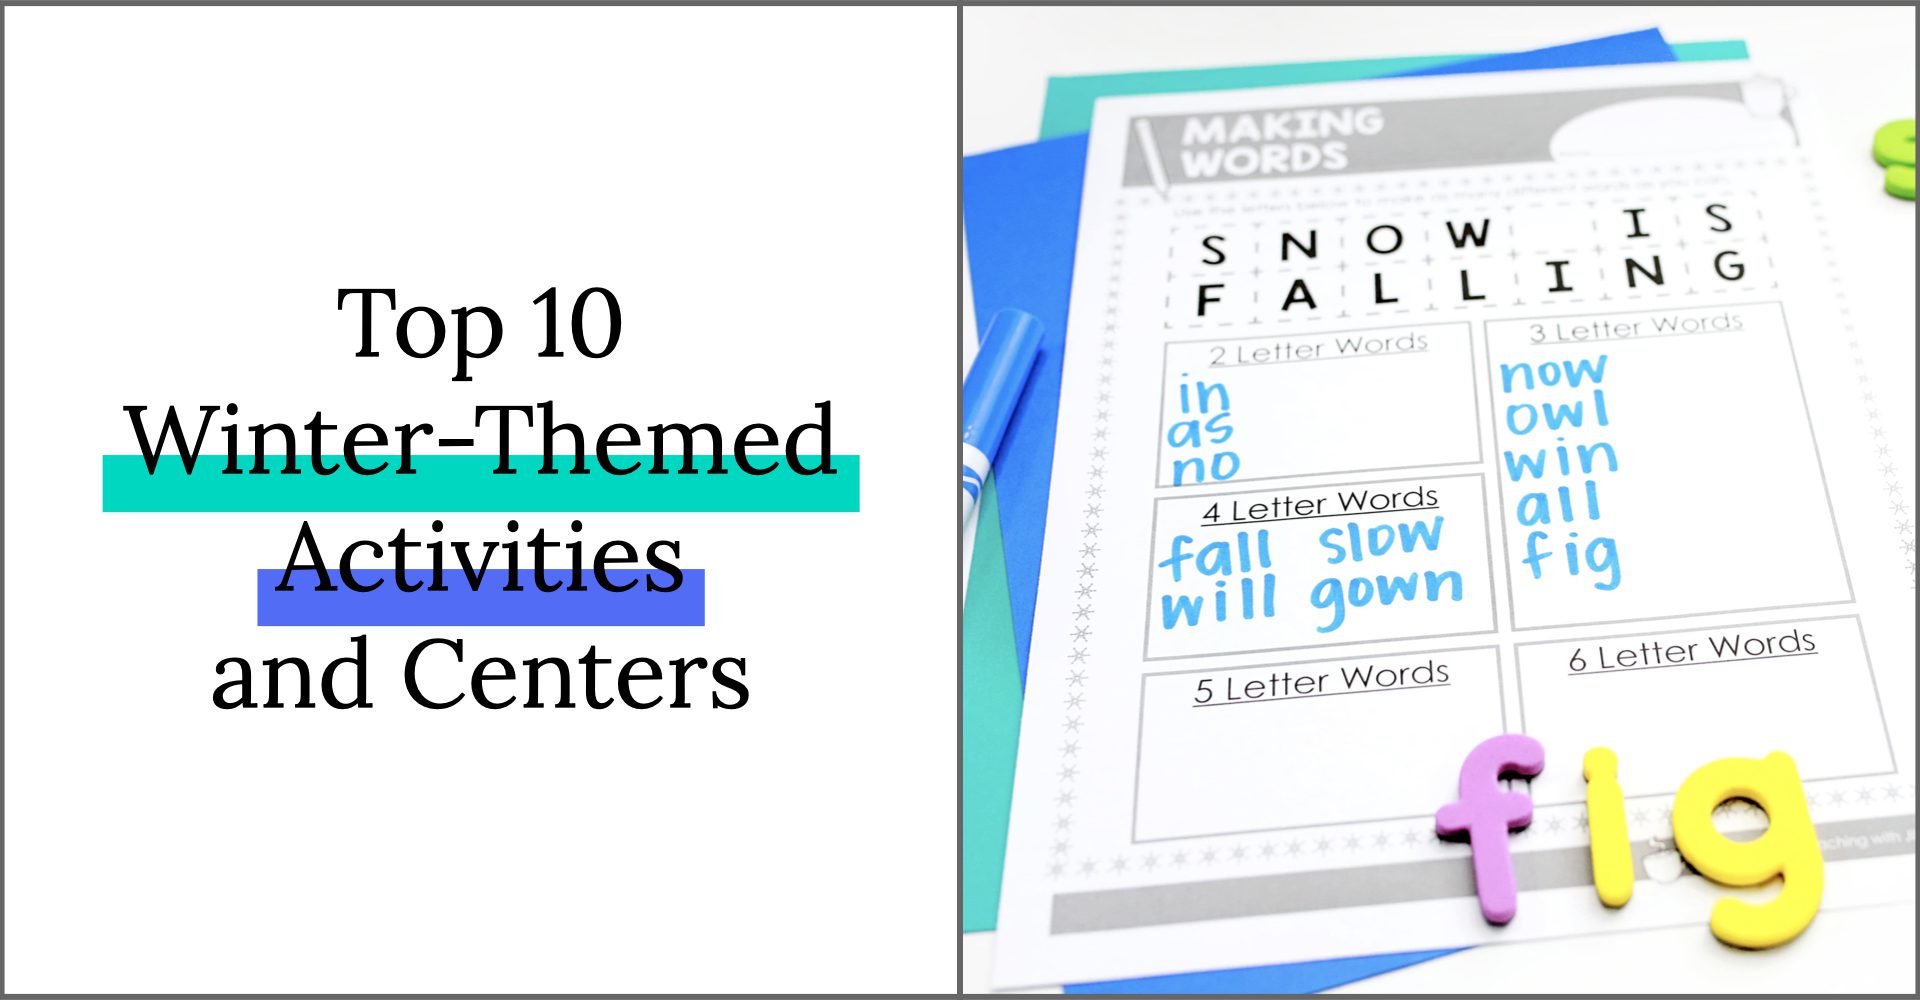 Top 10 Winter-Themed Activities and Centers